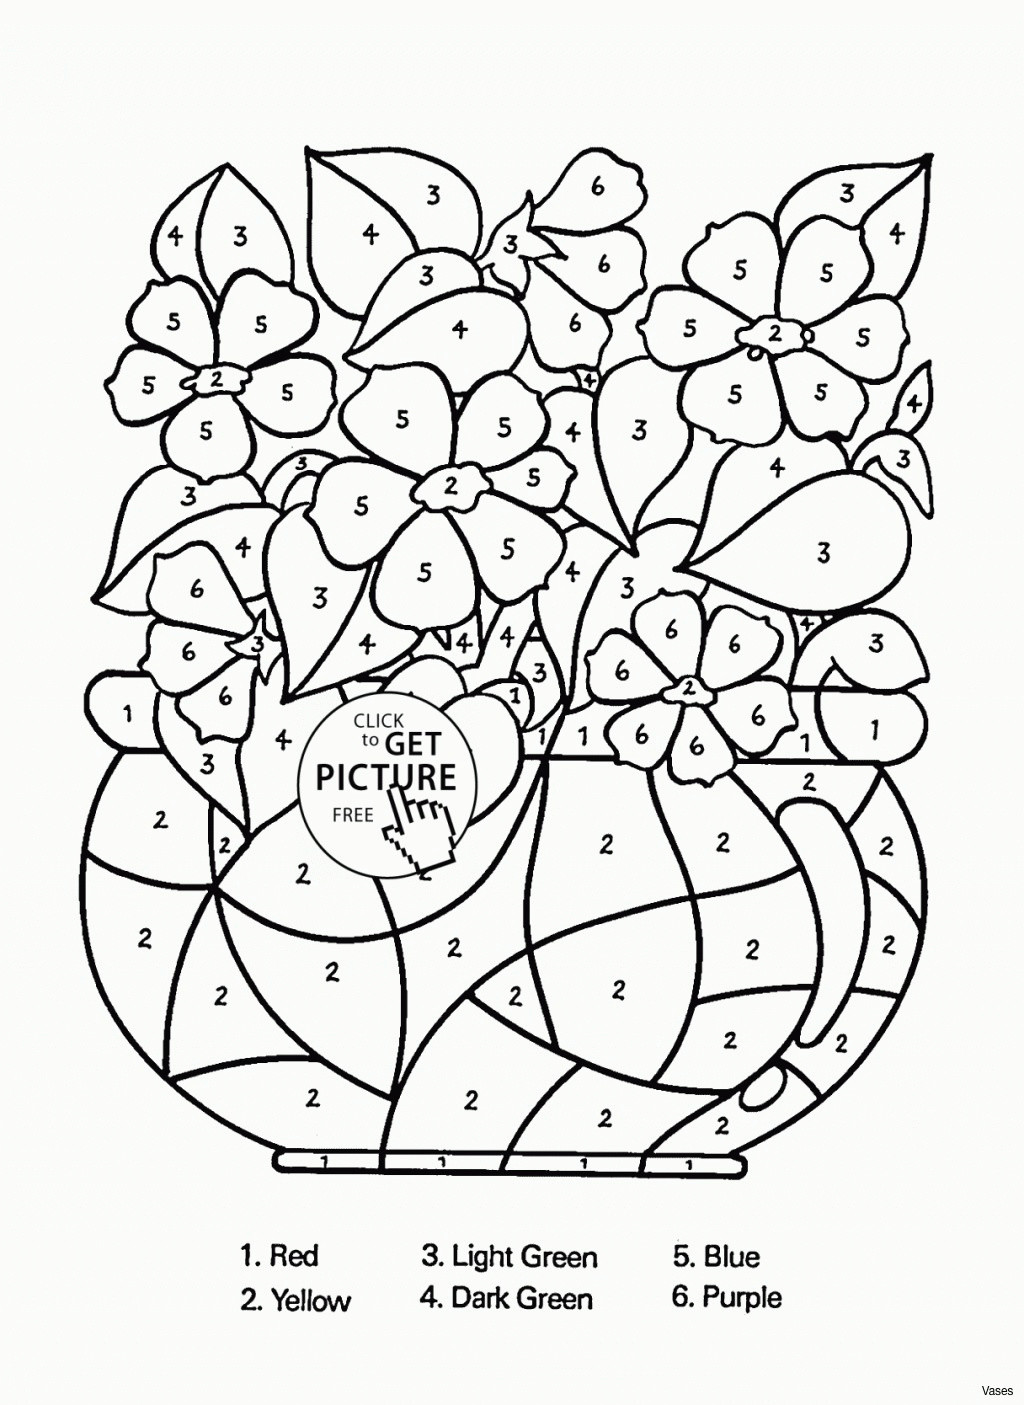 13 Fabulous Glass Angel Flower Vase 2024 free download glass angel flower vase of 5 elegant unique flower vases pics best roses flower regarding awesome flowers coloring pages new cool vases flower vase coloring page of 5 elegant unique flower